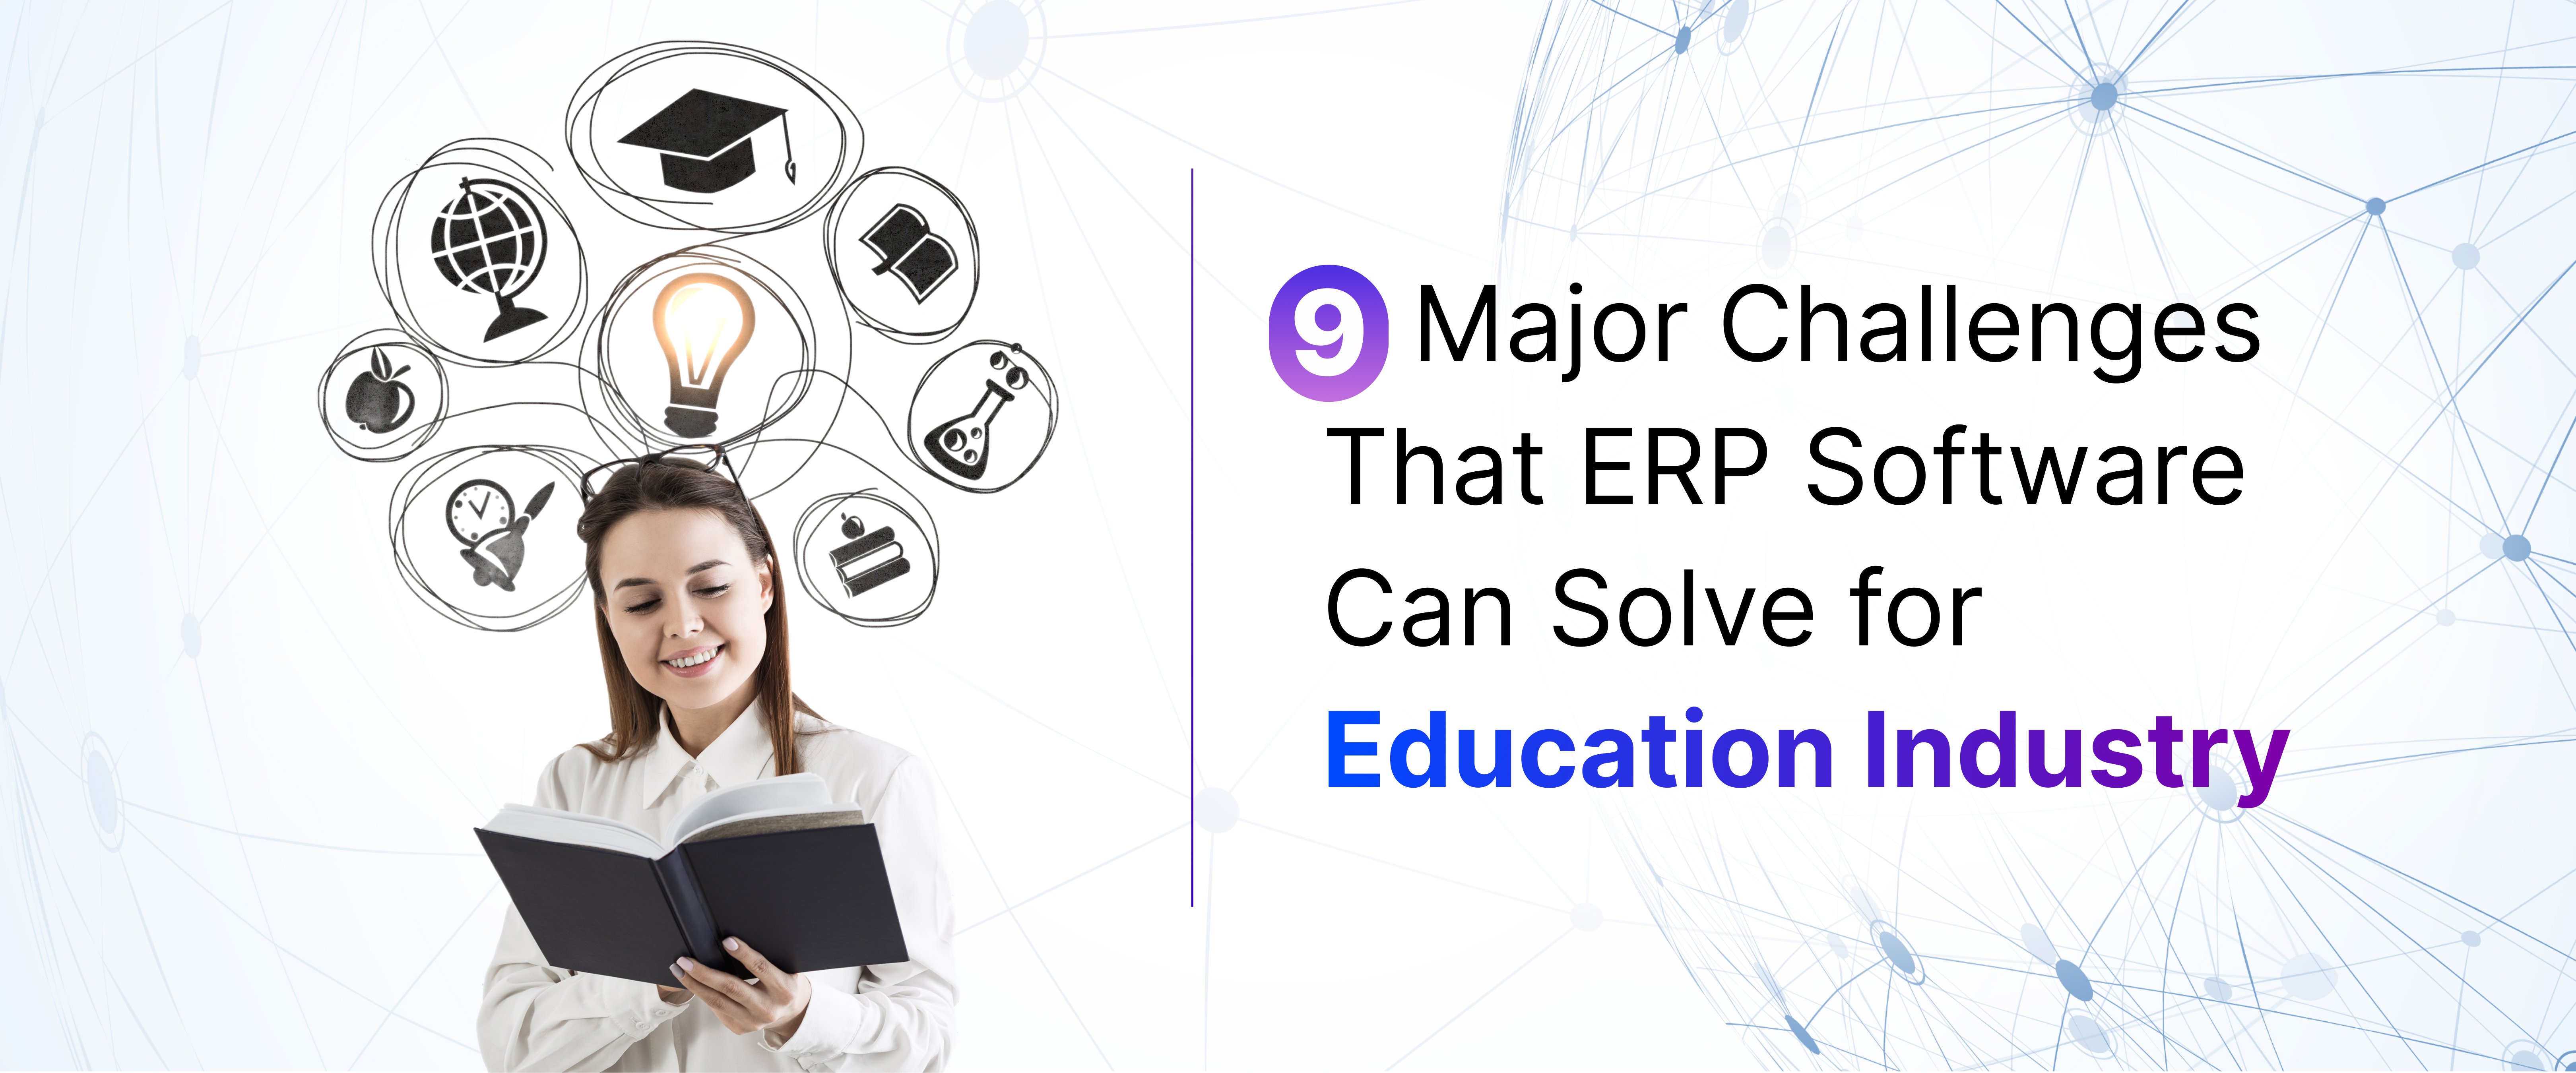 9 Major Challenges That ERP Software Can Solve for Education Industry